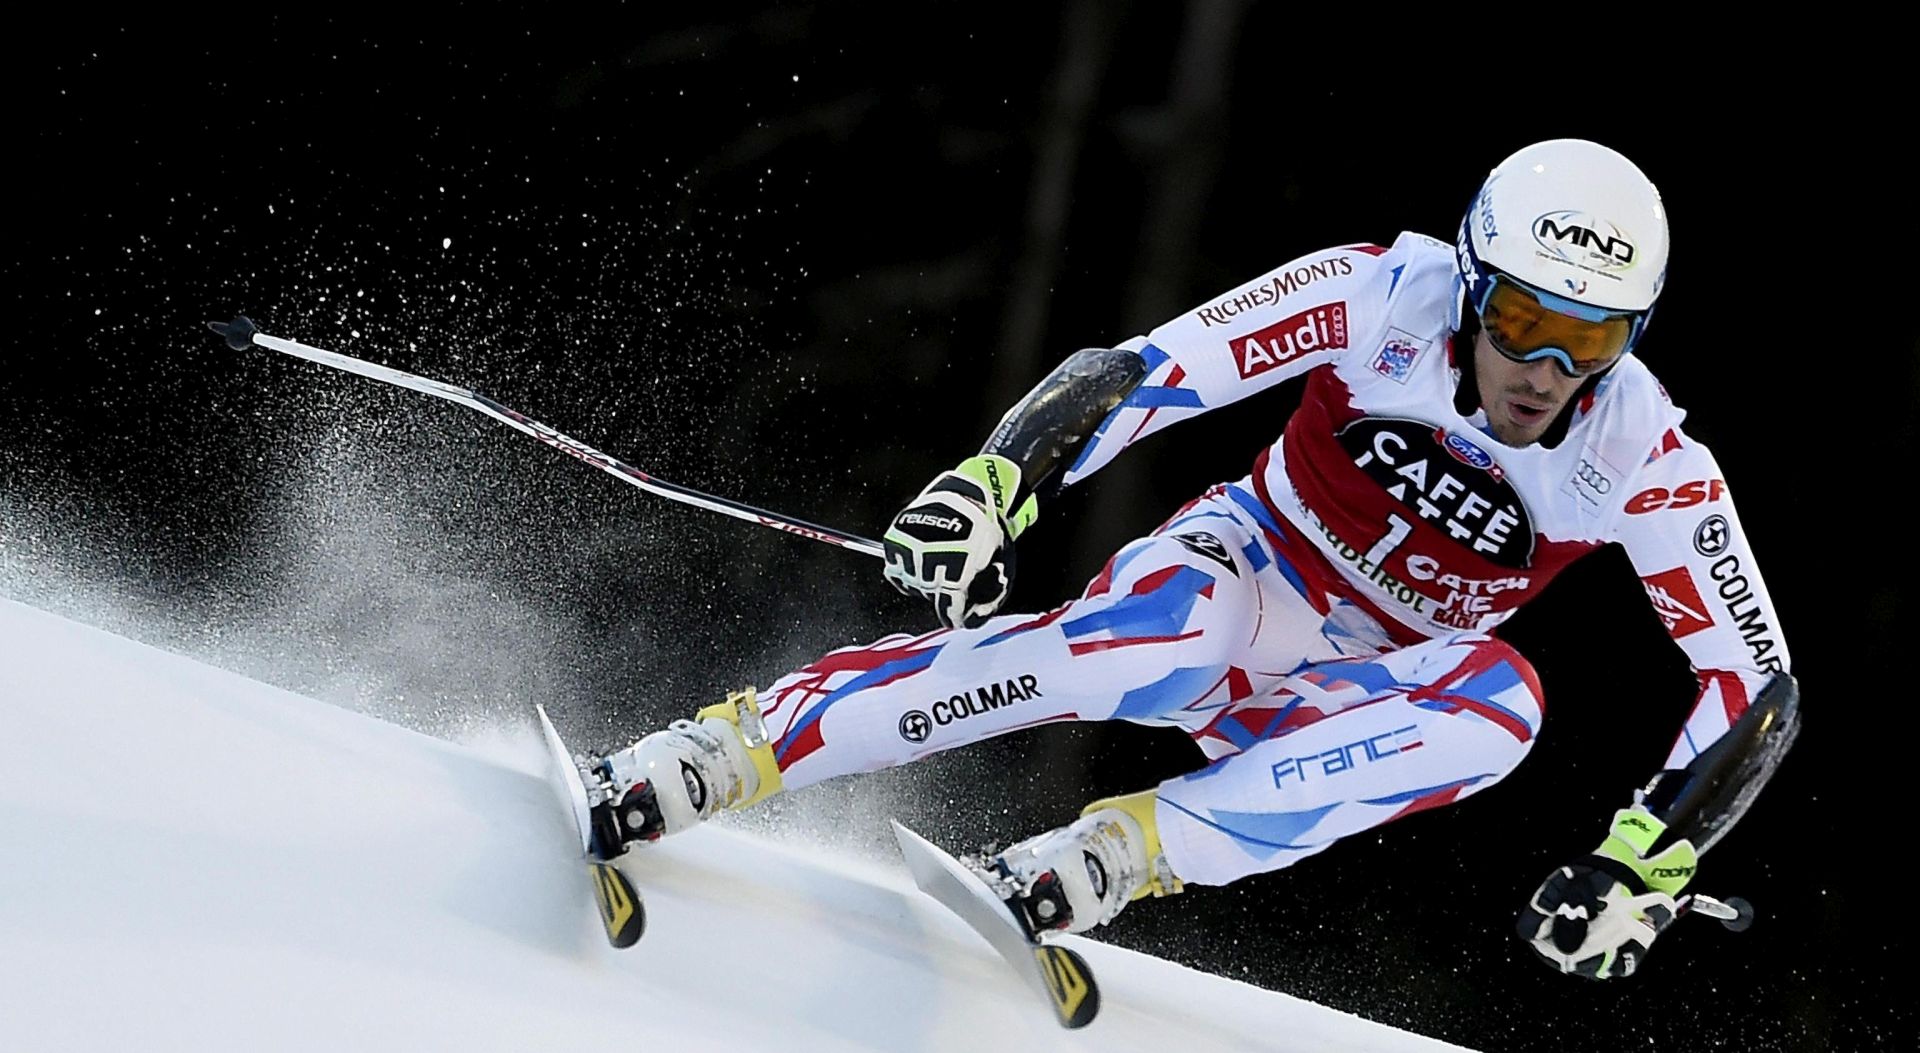 epa05076207 Victor Muffat-Jeandet of France in action during the first run of the men's Giant Slalom of the FIS Alpine Skiing World Cup in Alta Badia, Italy, 20 December 2015.  EPA/CLAUDIO ONORATI